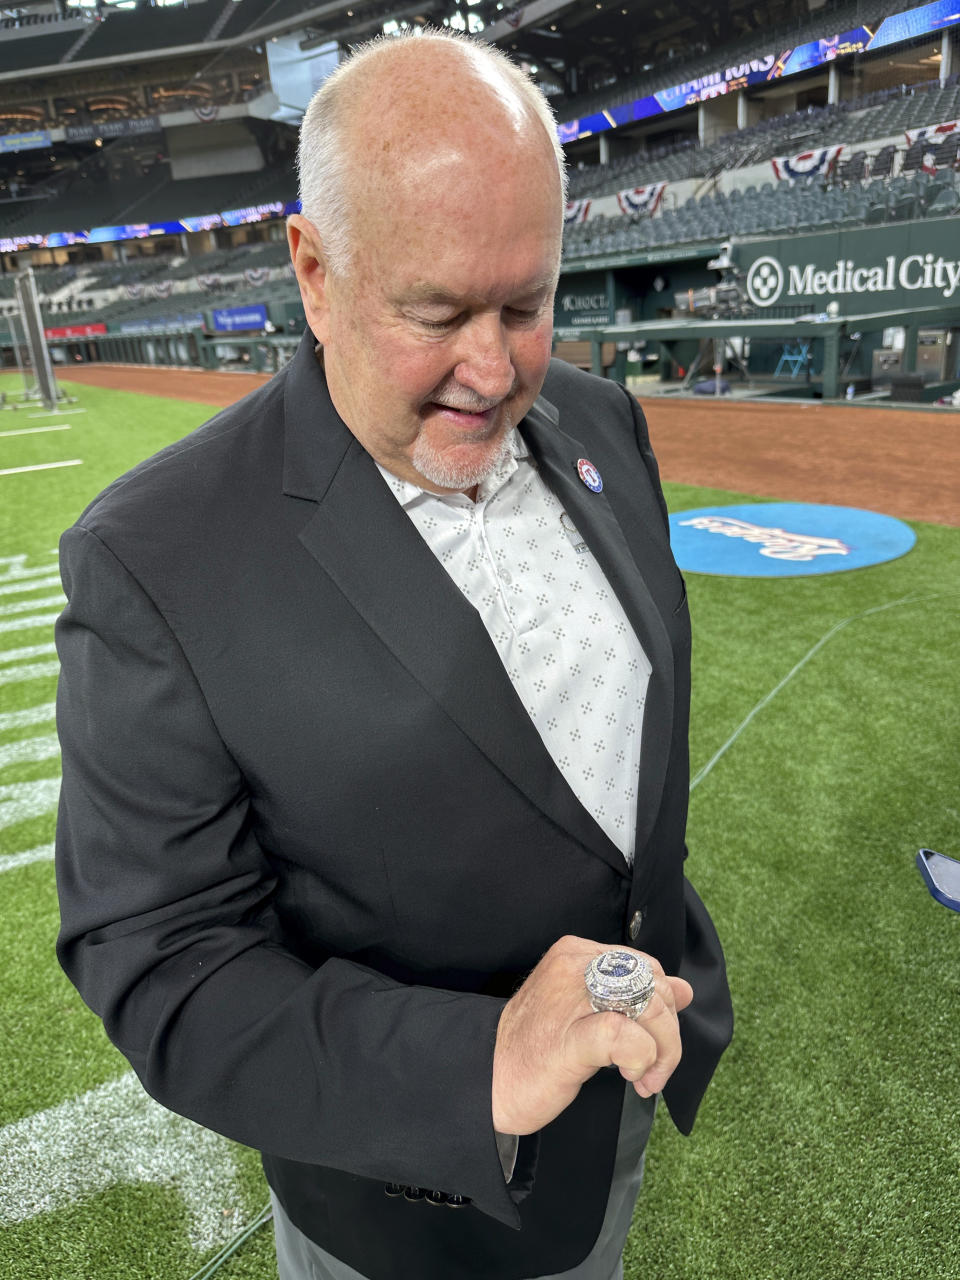 Texas Rangers longtime public address announcer Chuck Morgan admires his World Series championship ring, Saturday, March 30, 2024 in Arlington Texas. The Texas Rangers and staff will receive their World Series championship rings during a pre-game ceremony before the Texas Rangers take on the Chicago Cubs in a baseball game. (AP Photo/Stephen Hawkins)